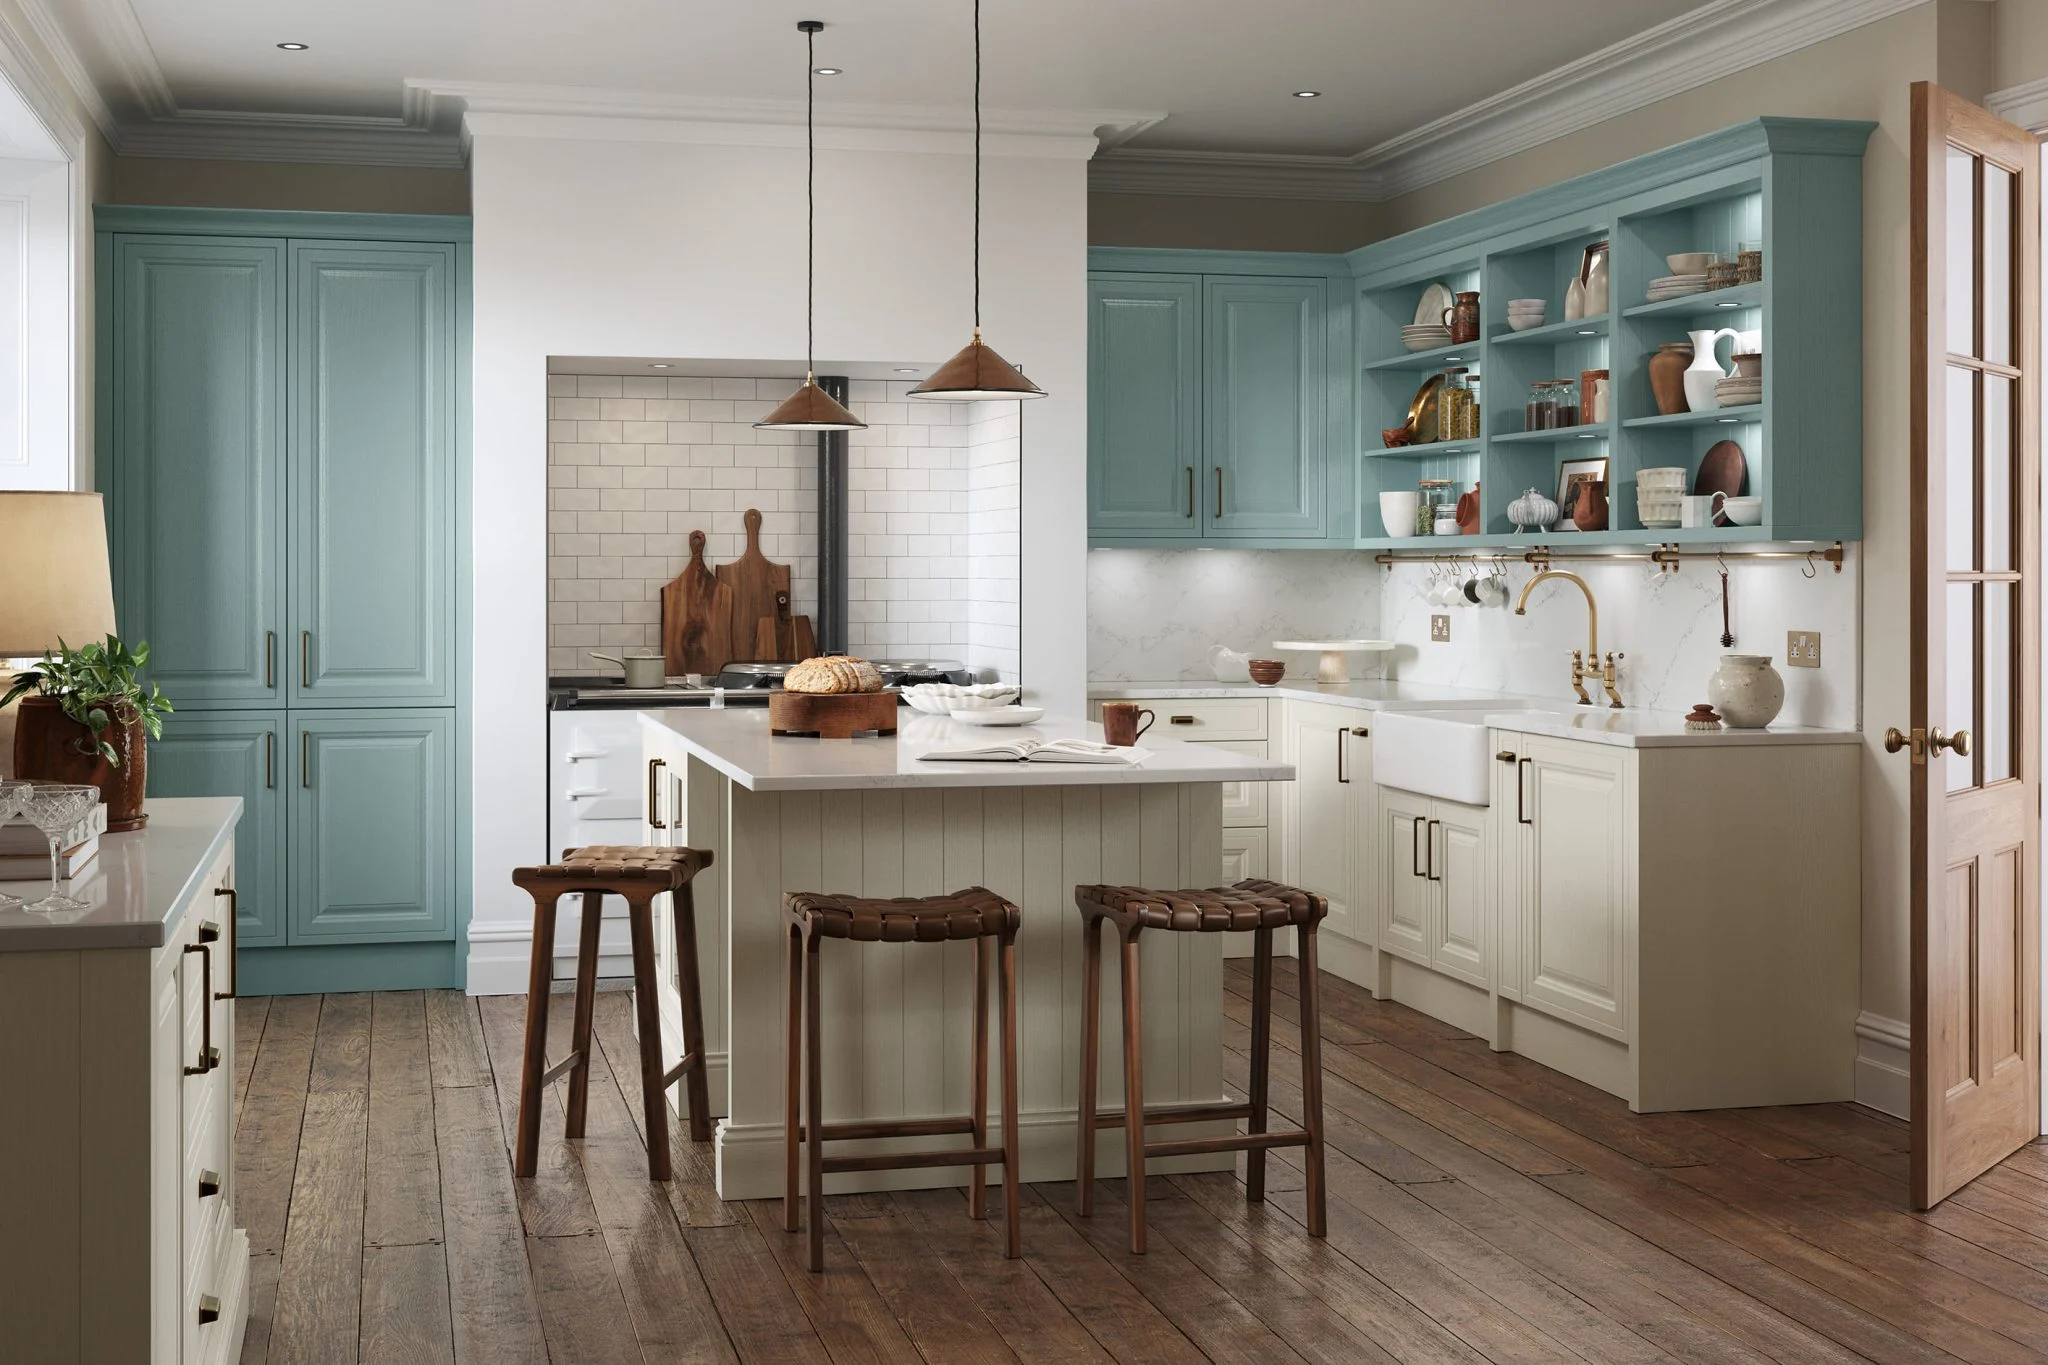 jacobsen-taupe-grey-light-teal-classic-traditional-kitchen-uform-2048x1365